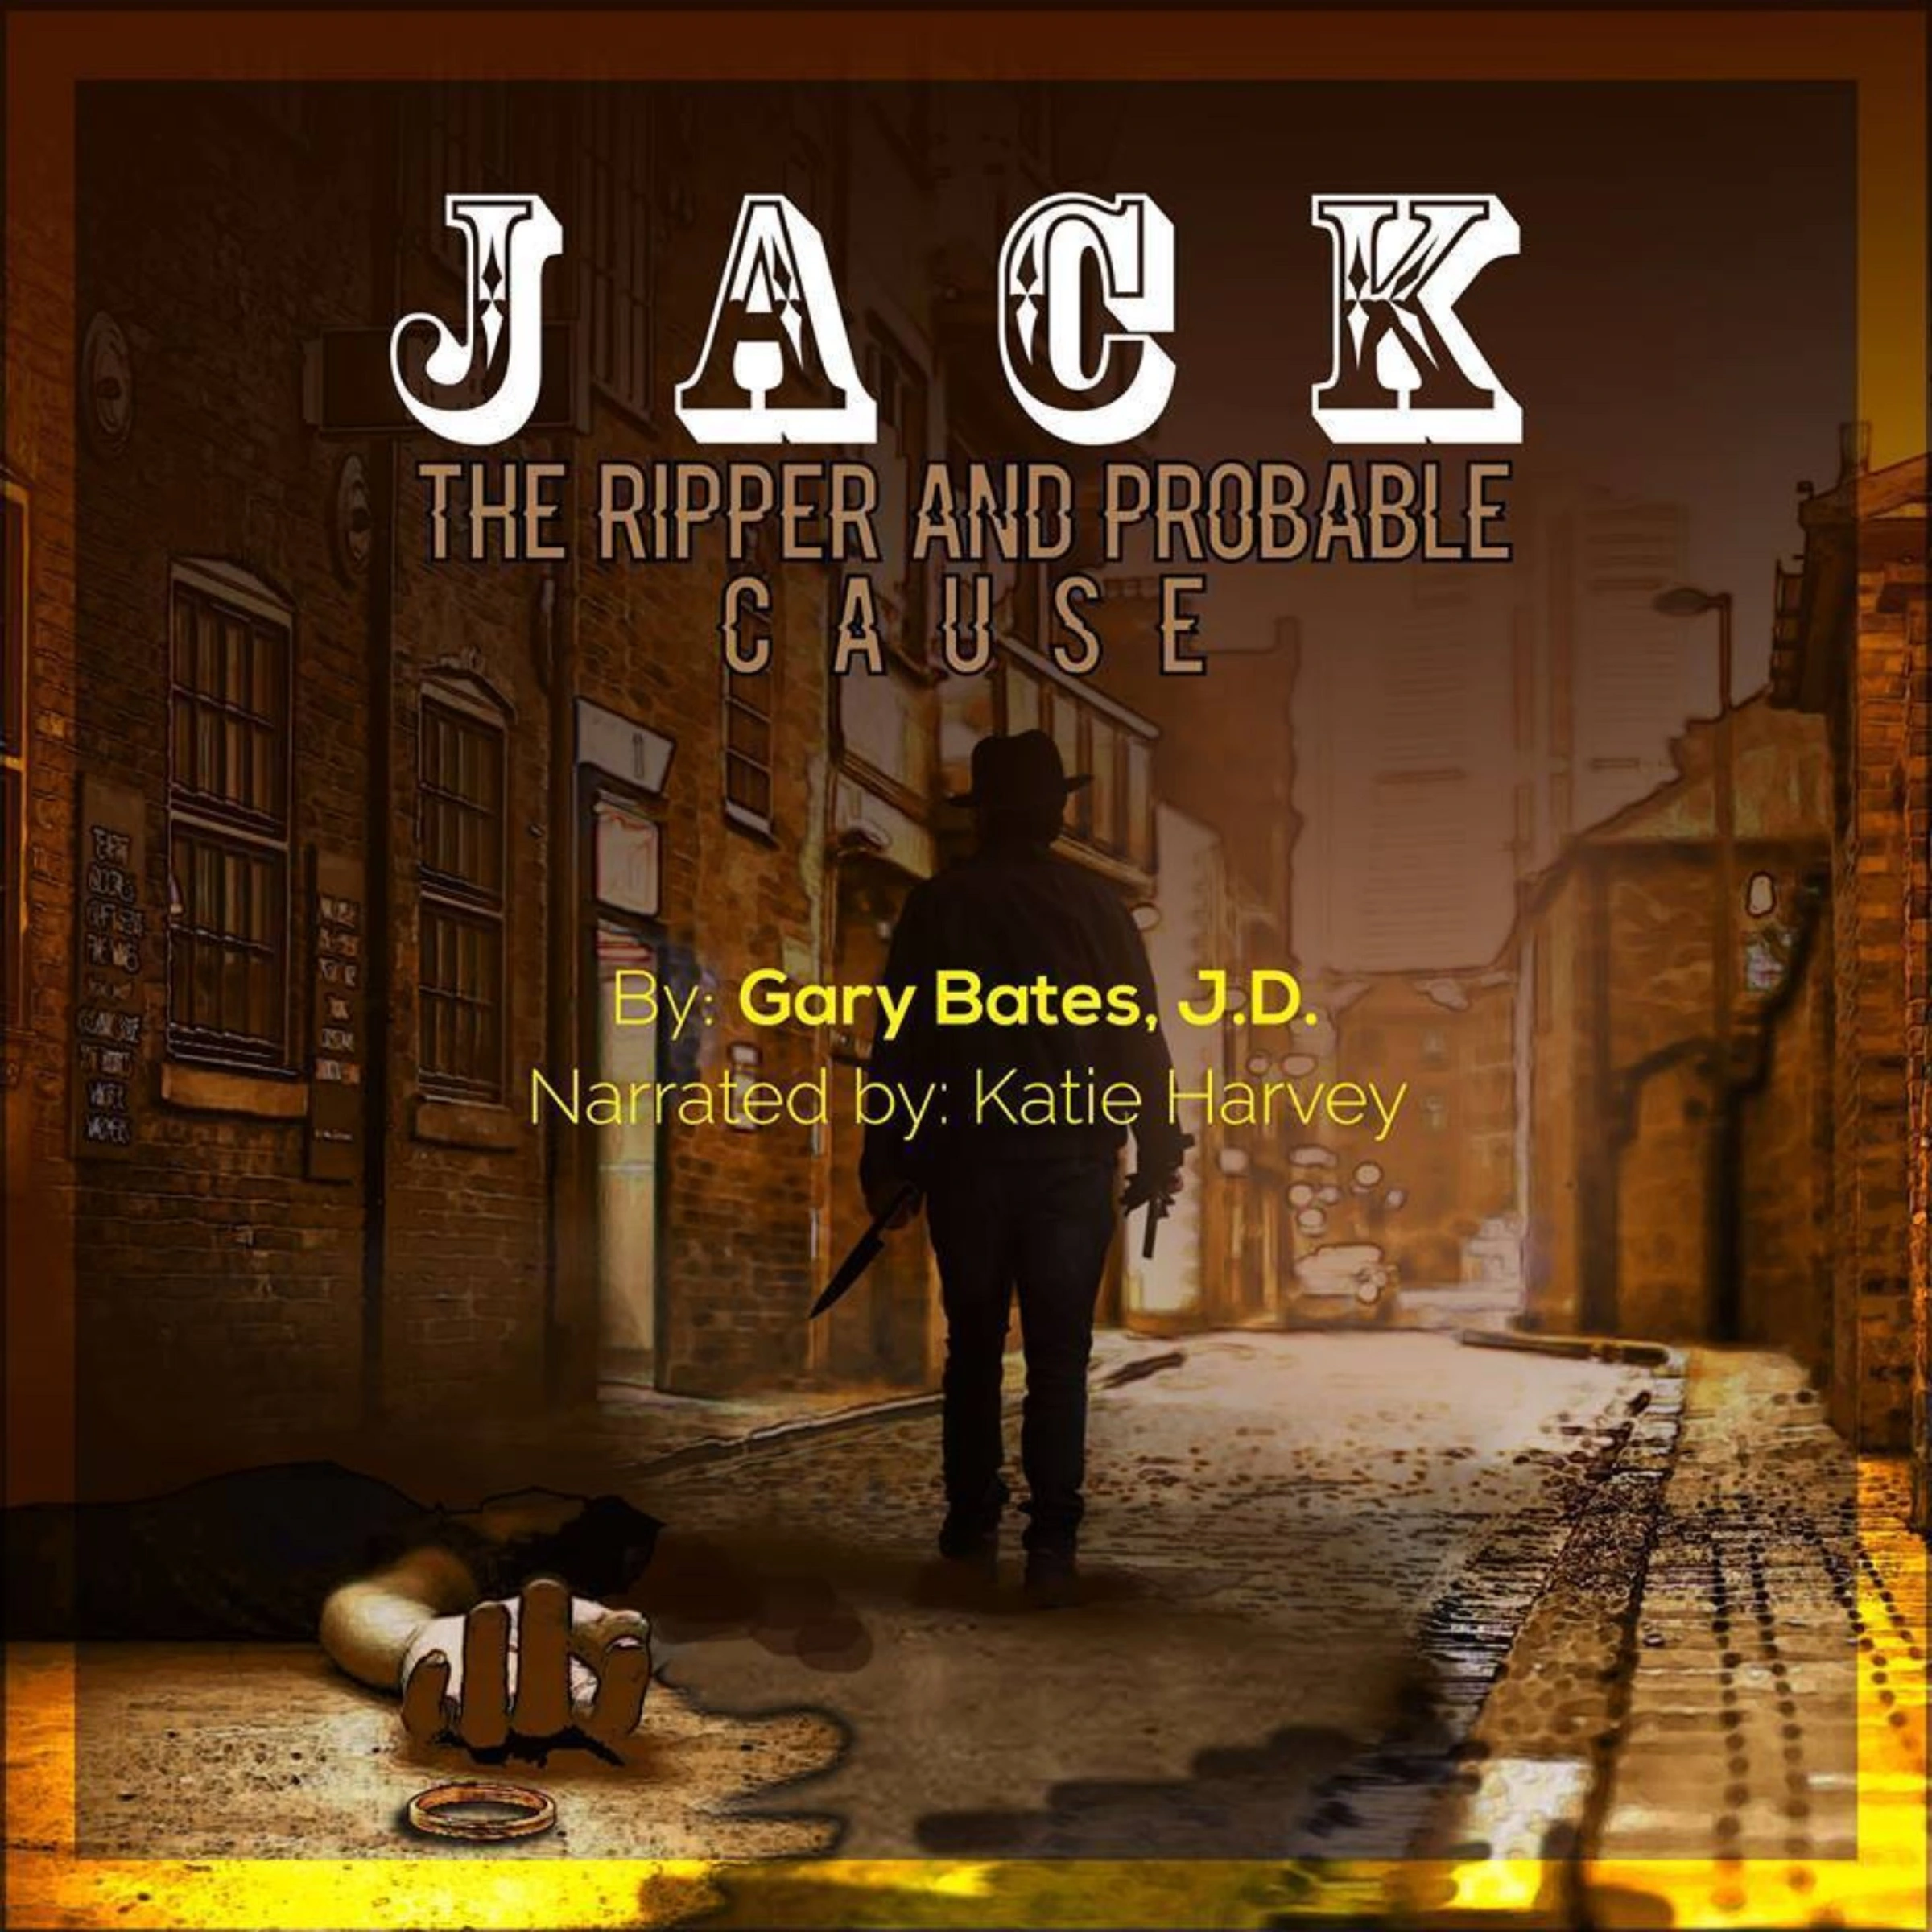 Jack the Ripper and Probable Cause Audiobook by J.D.